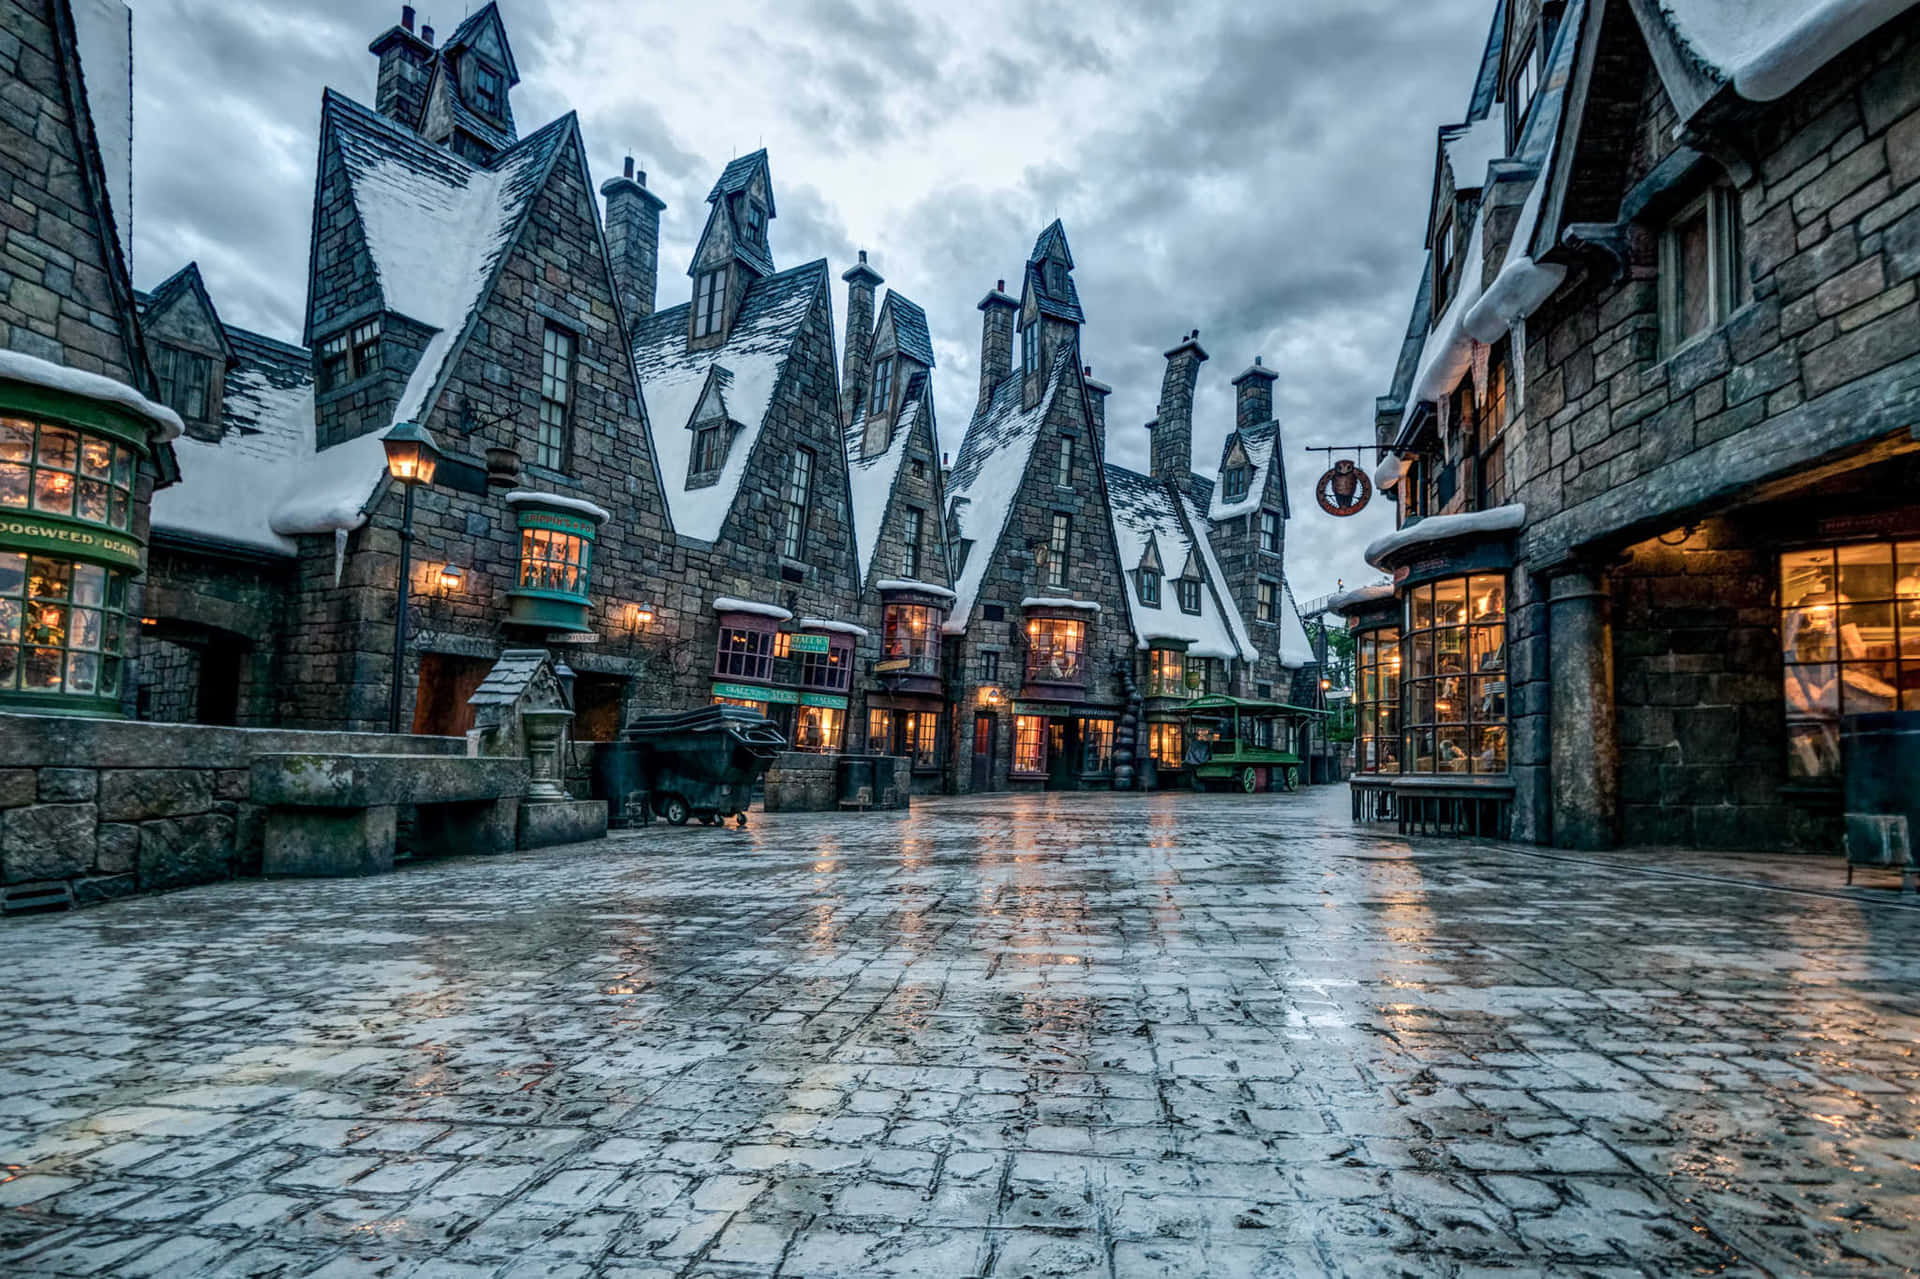 Step into the wizarding world and experience magic like never before! Wallpaper